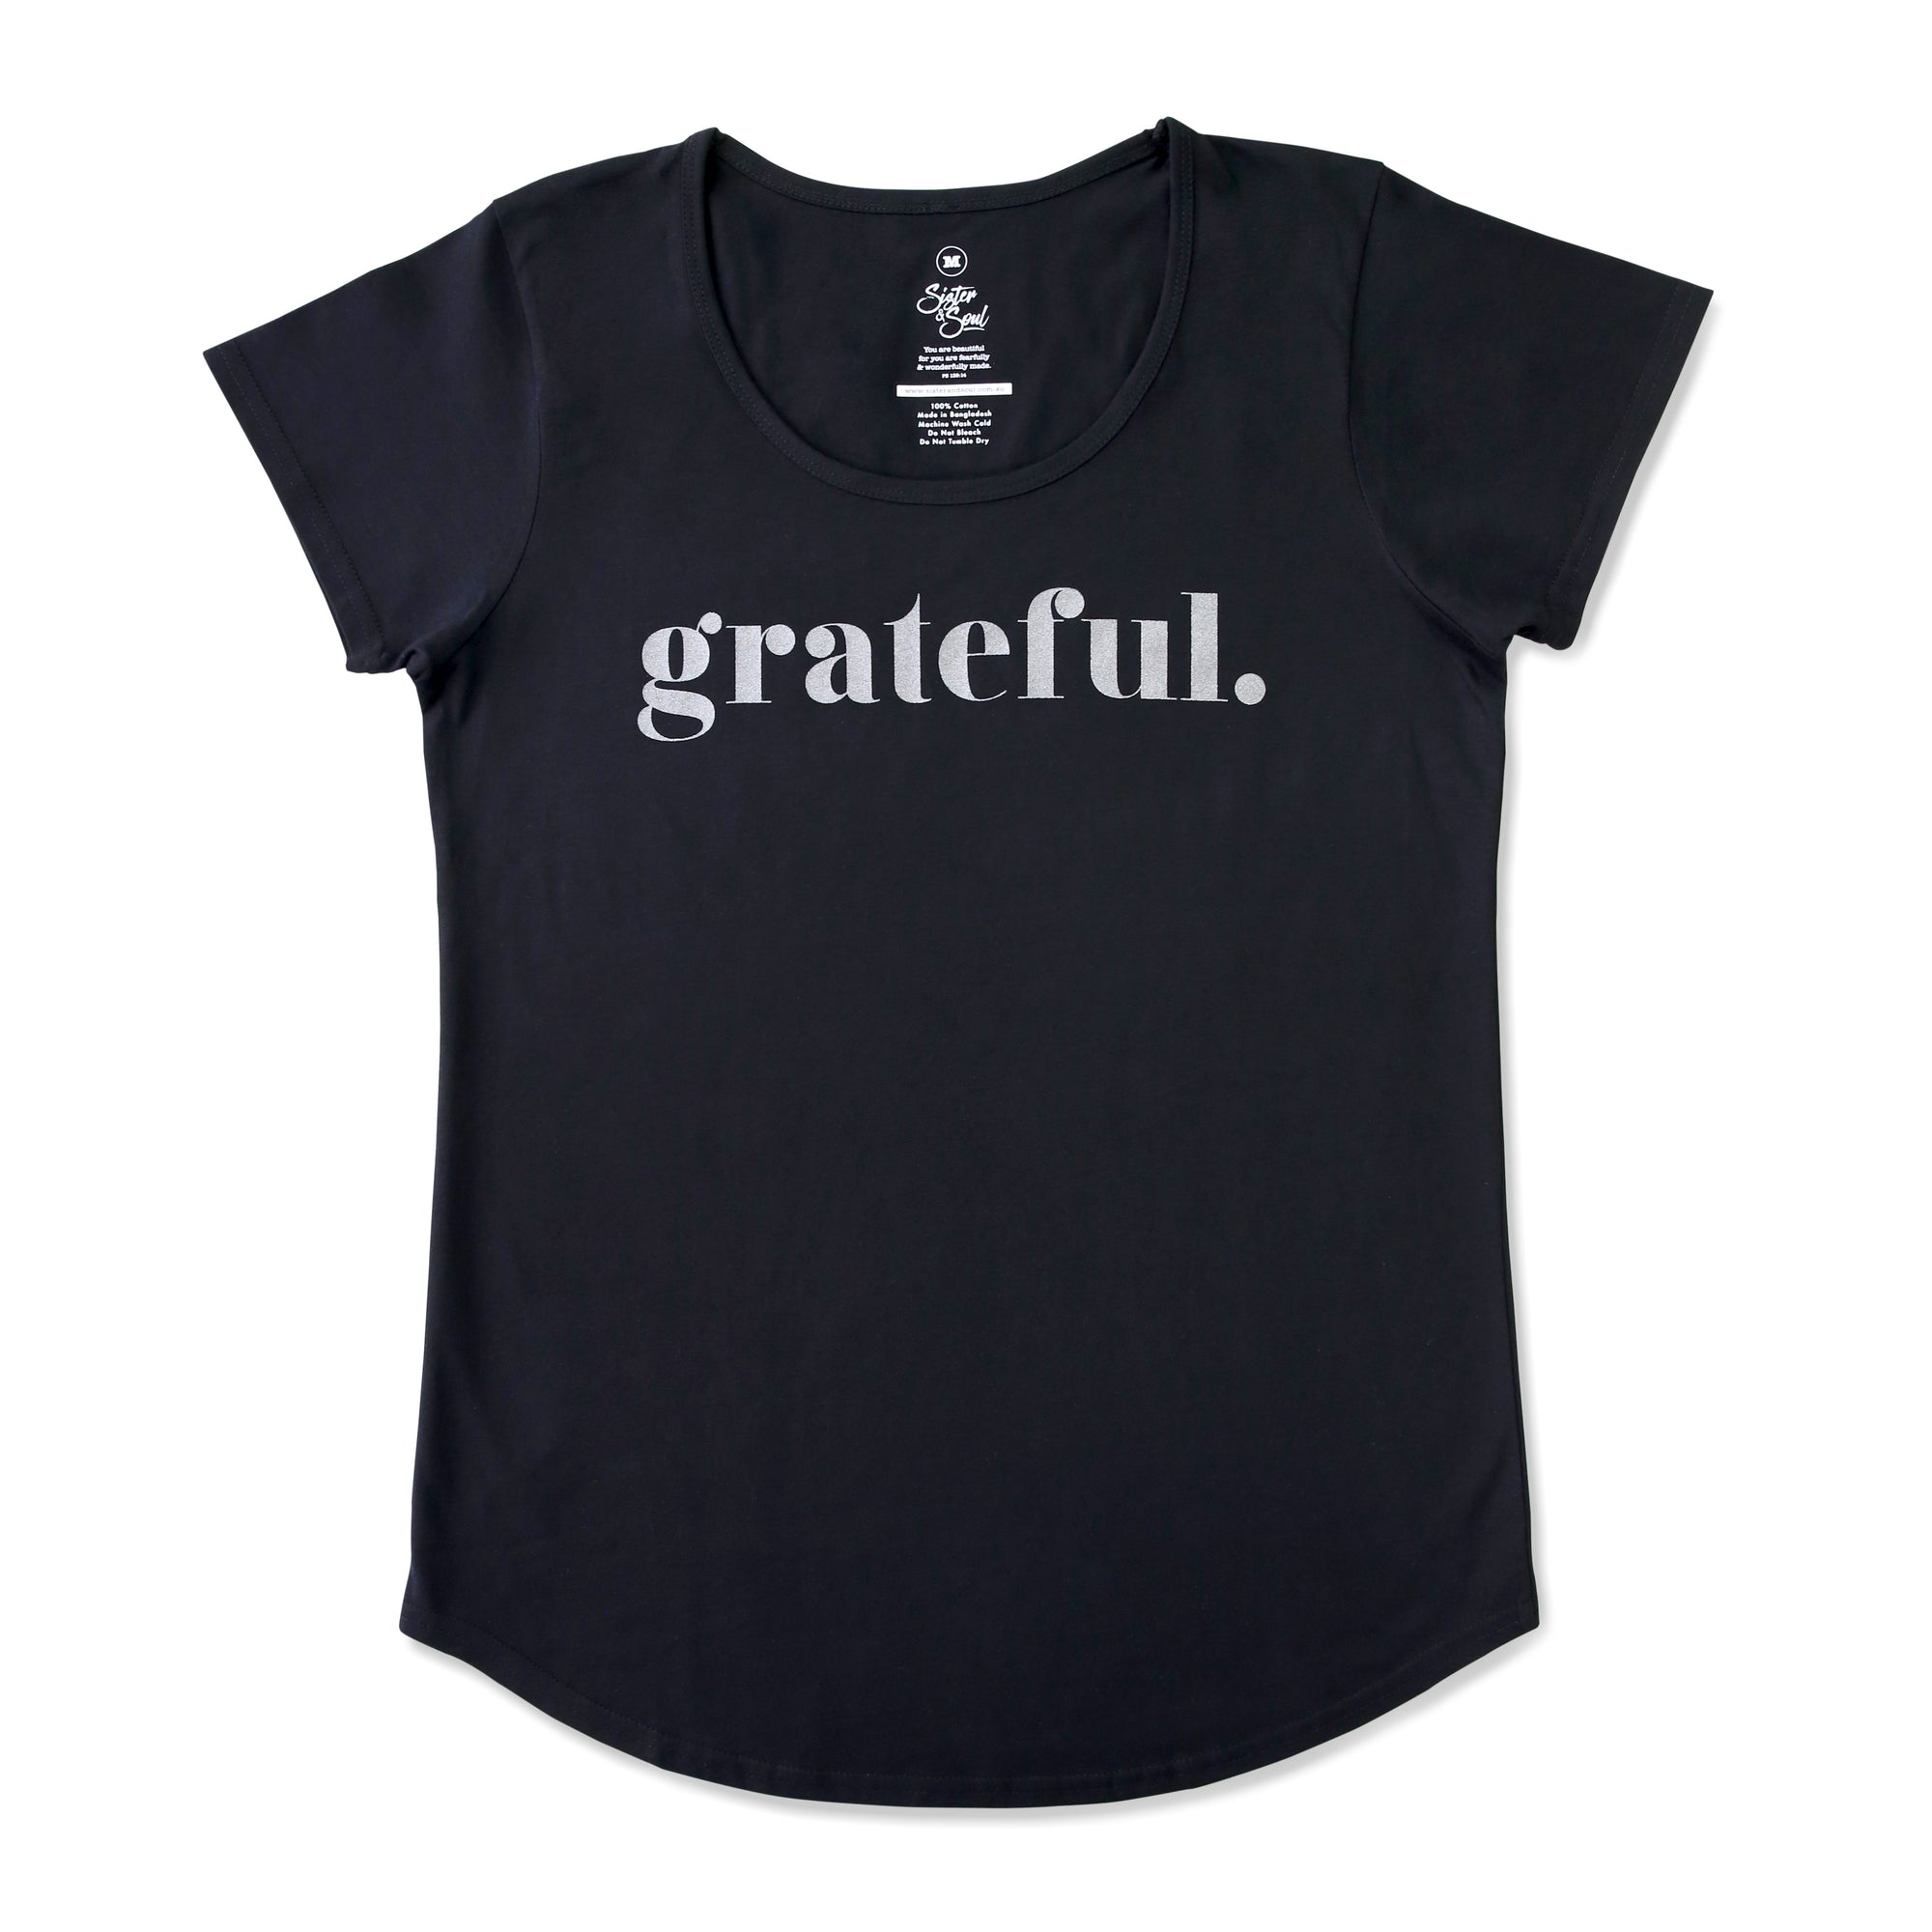 Grateful Tee - Black Scoopy - Charcoal Shimmer Print